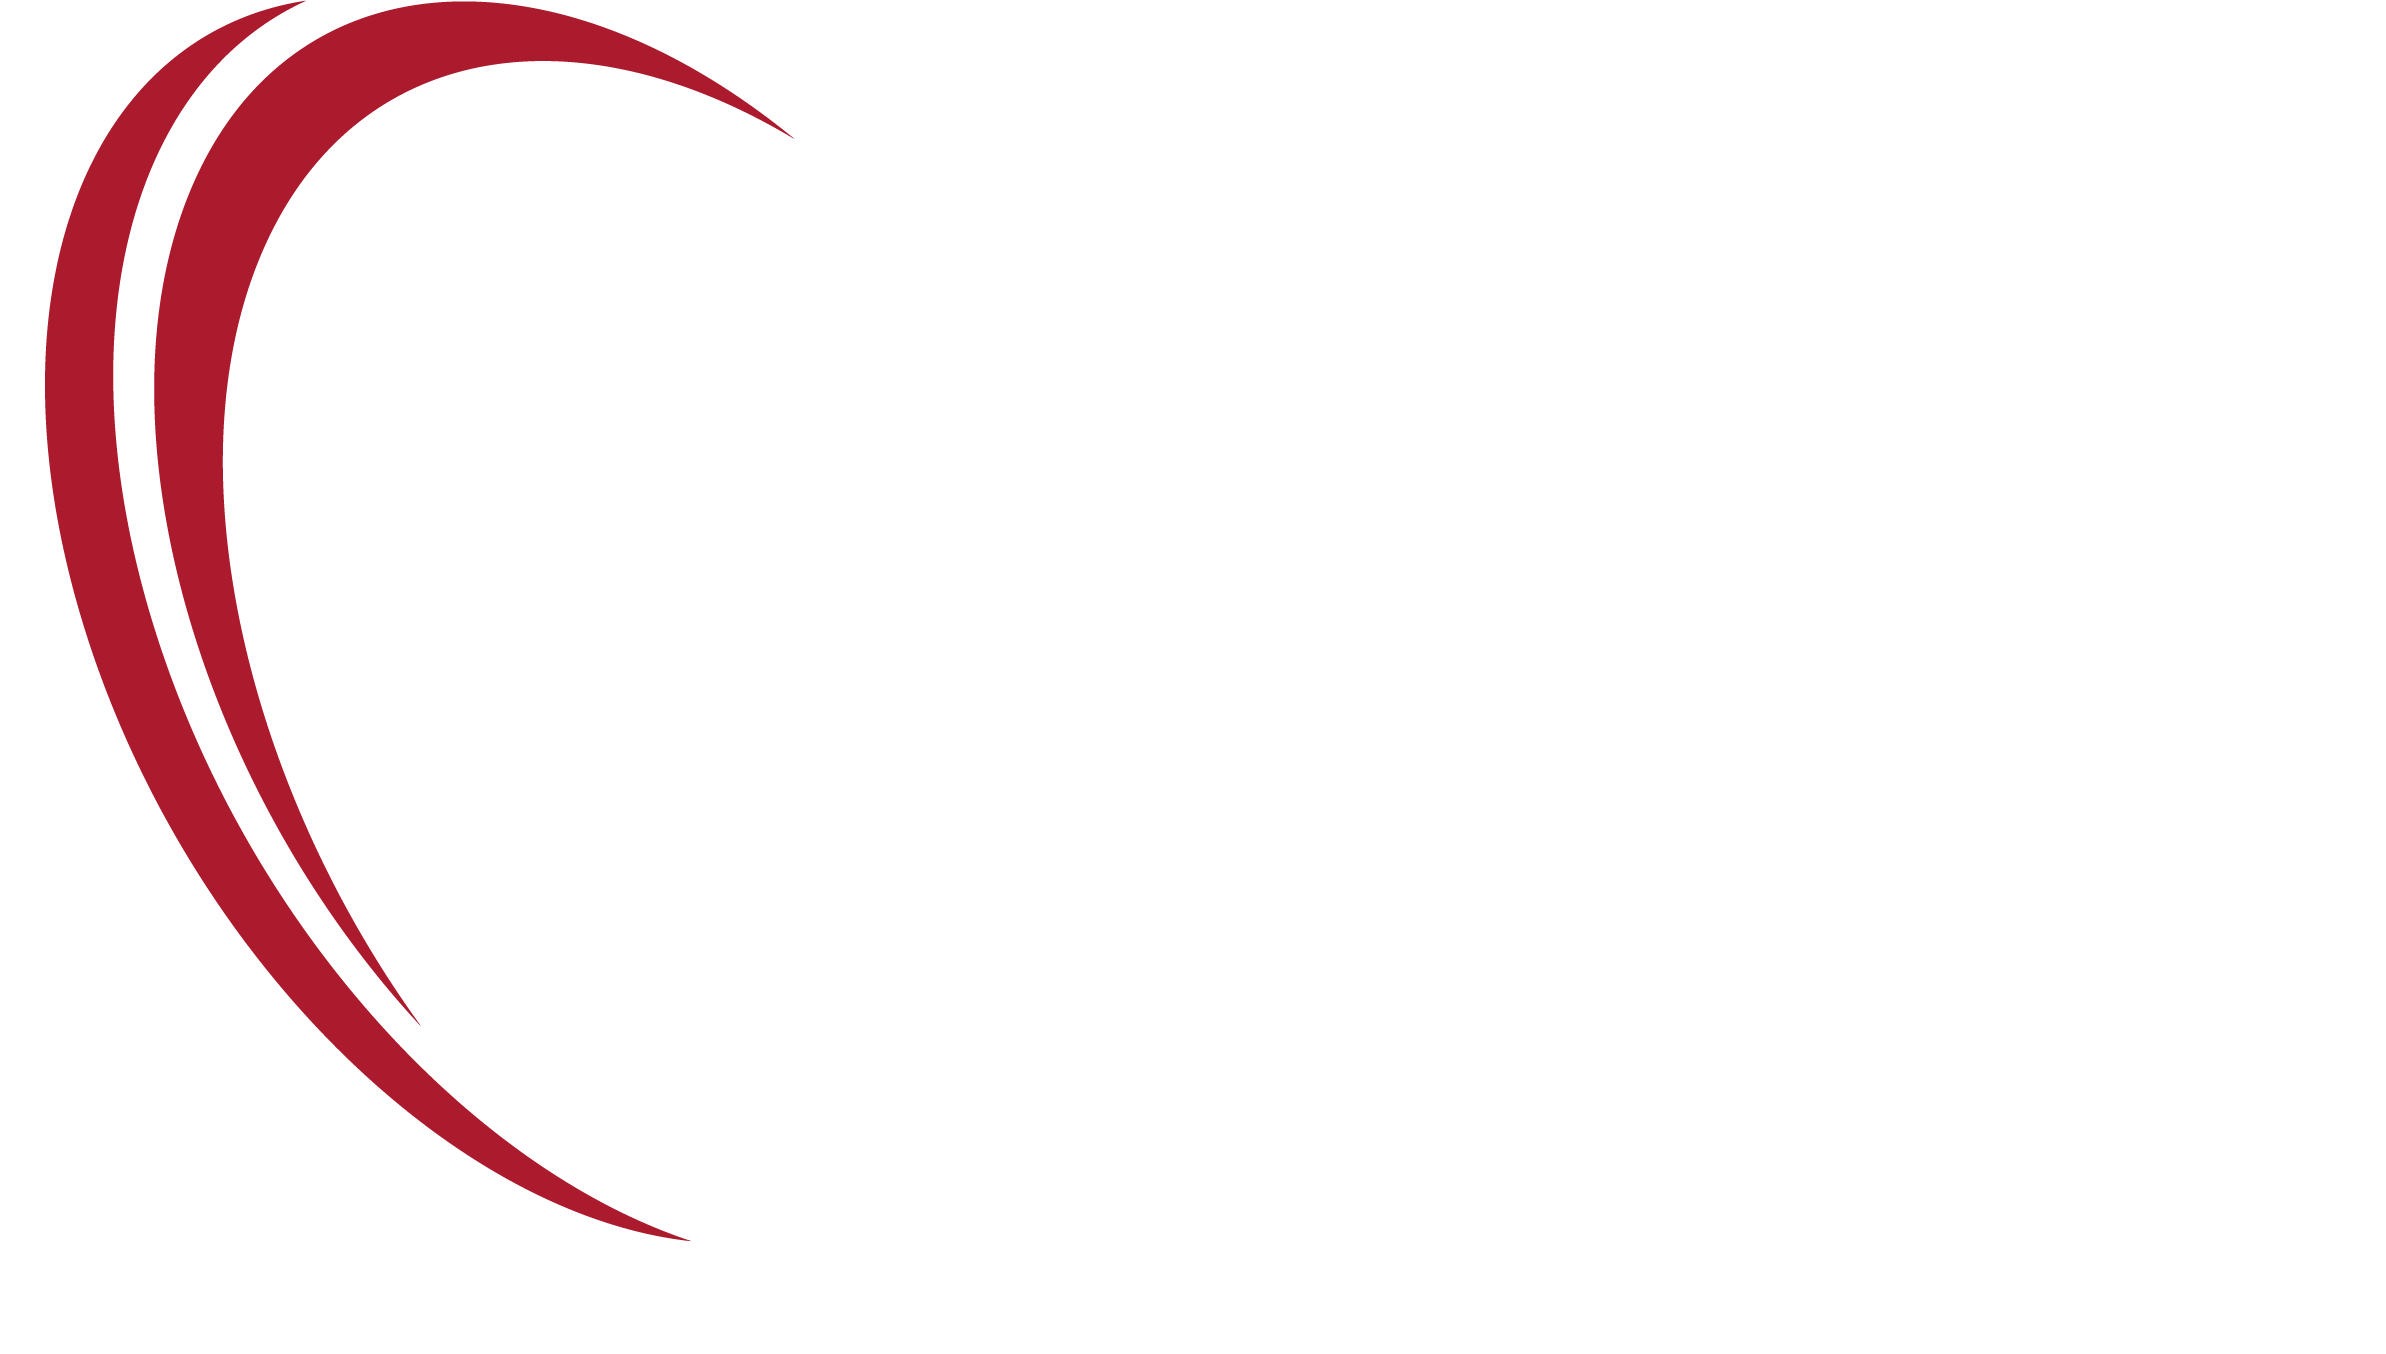 Central Illinois Ag - Brand Update